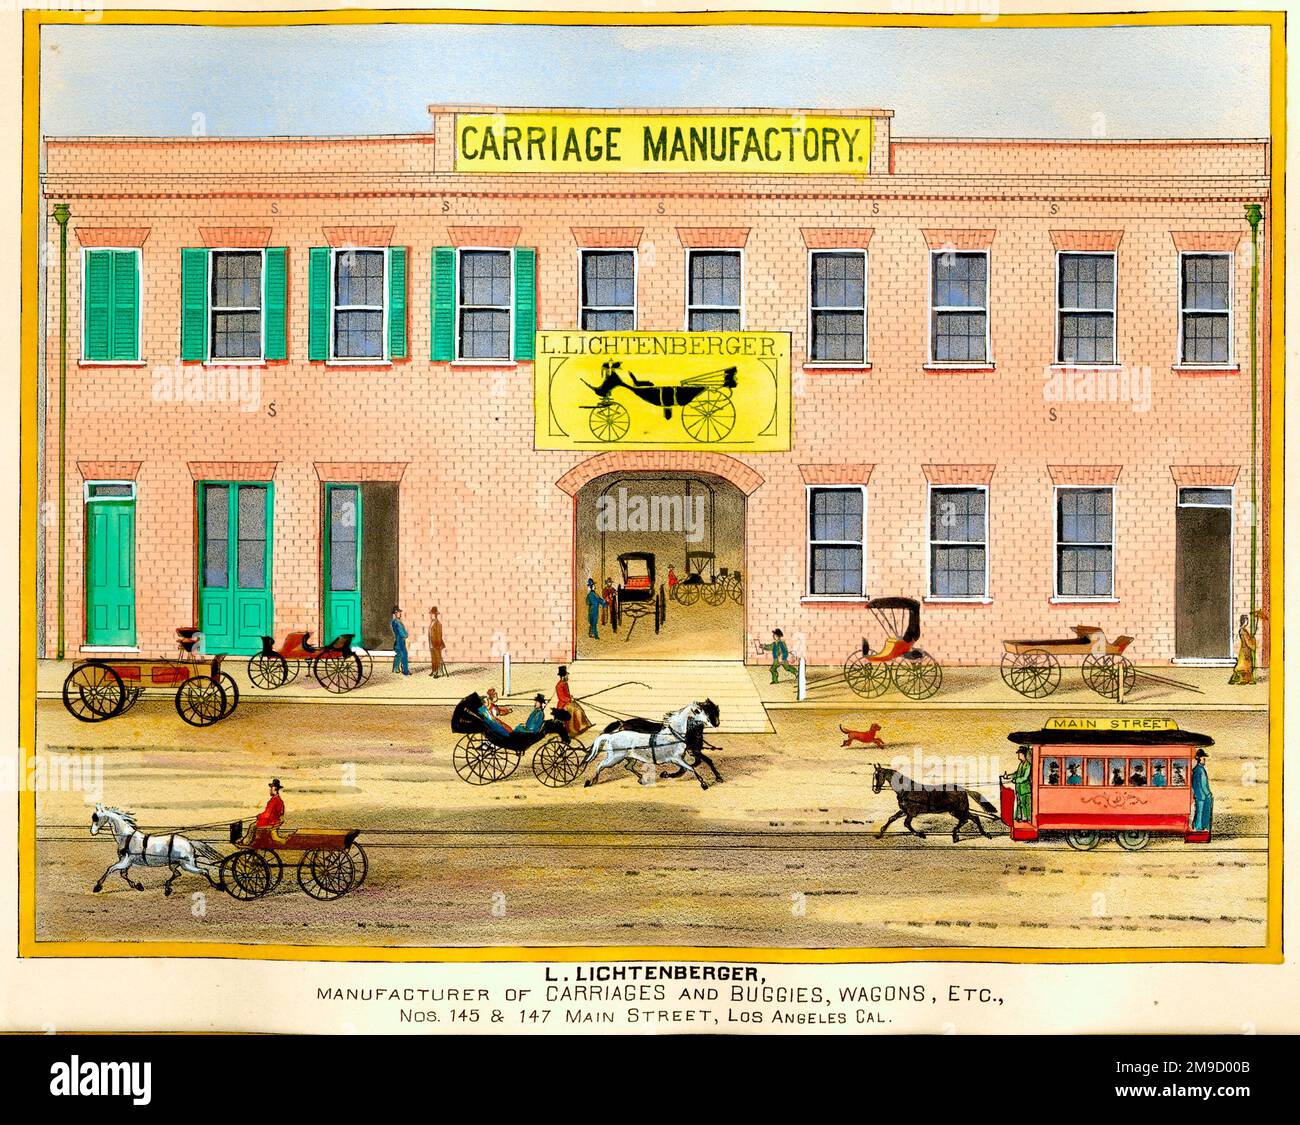 Carriage Manufactory, Los Angeles Banque D'Images